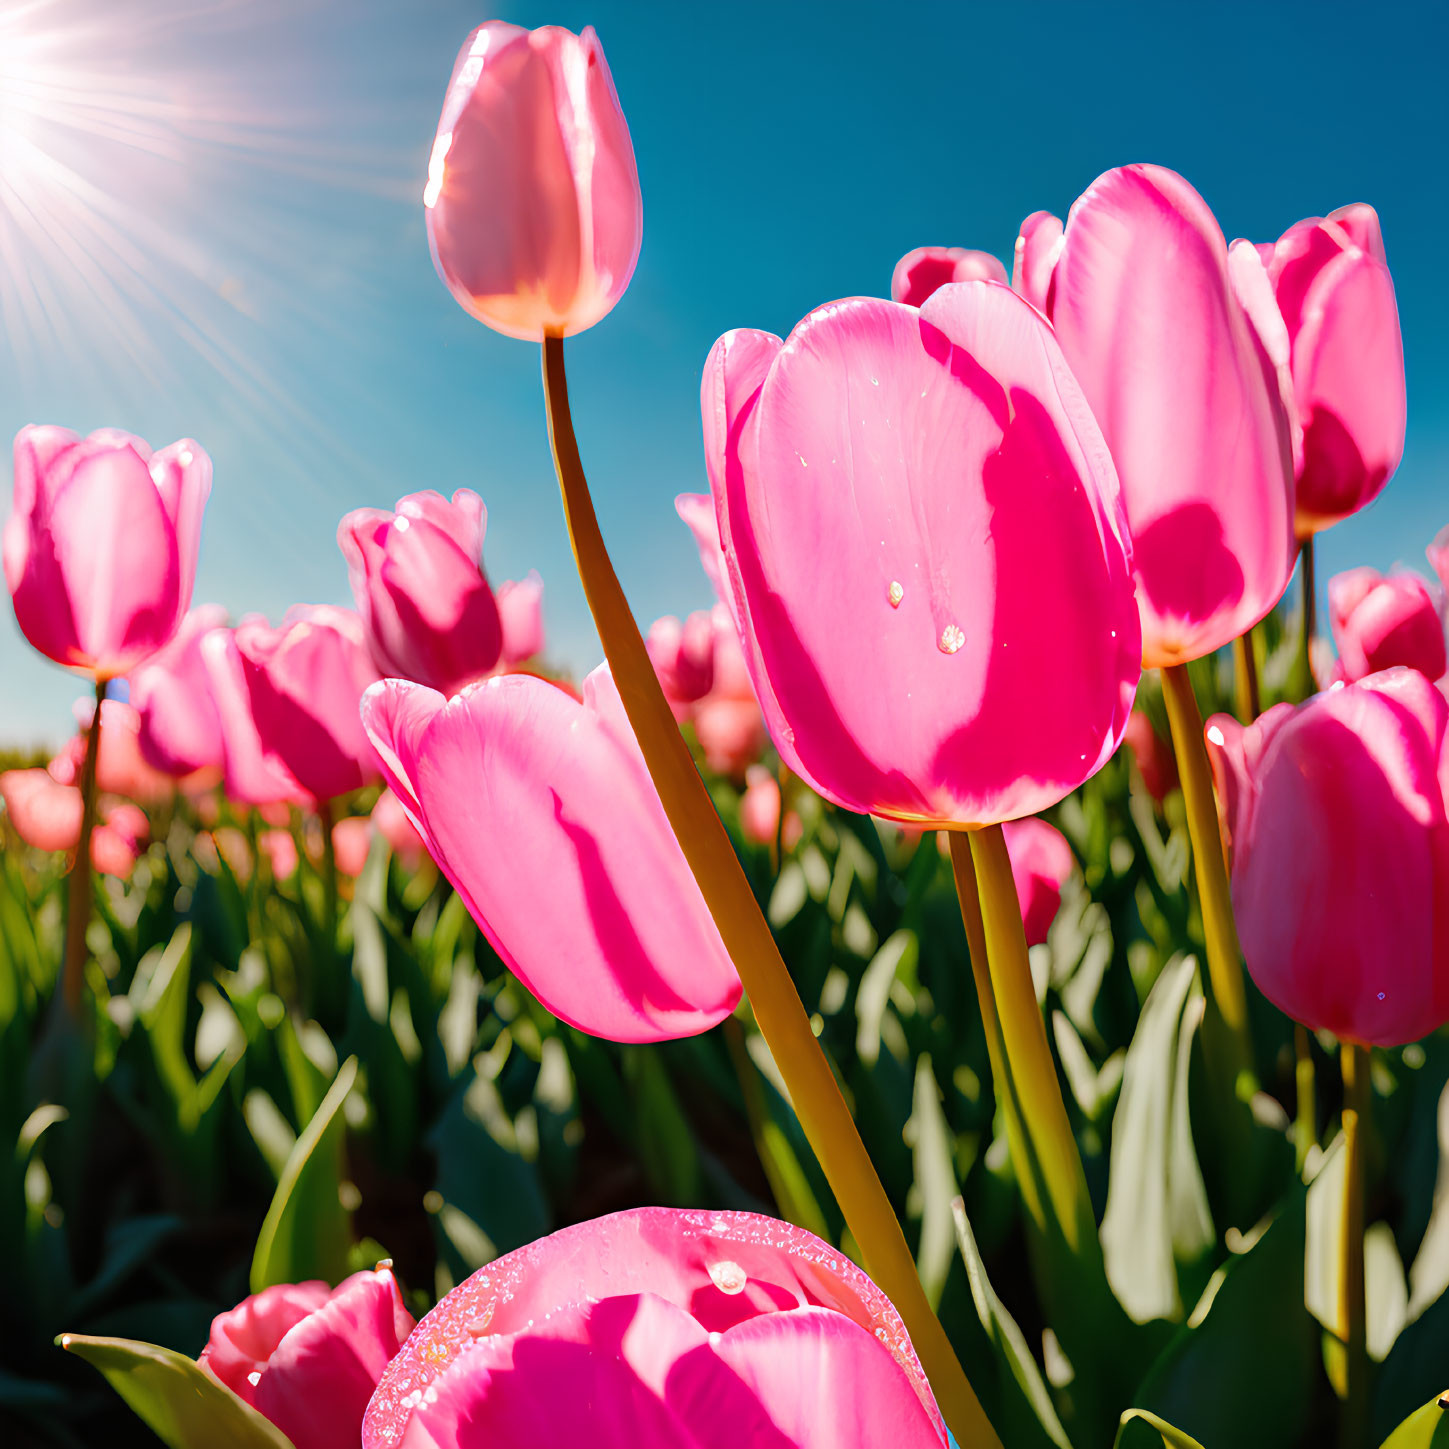 Bright Pink Tulips in Sunlit Sky with Dewdrops